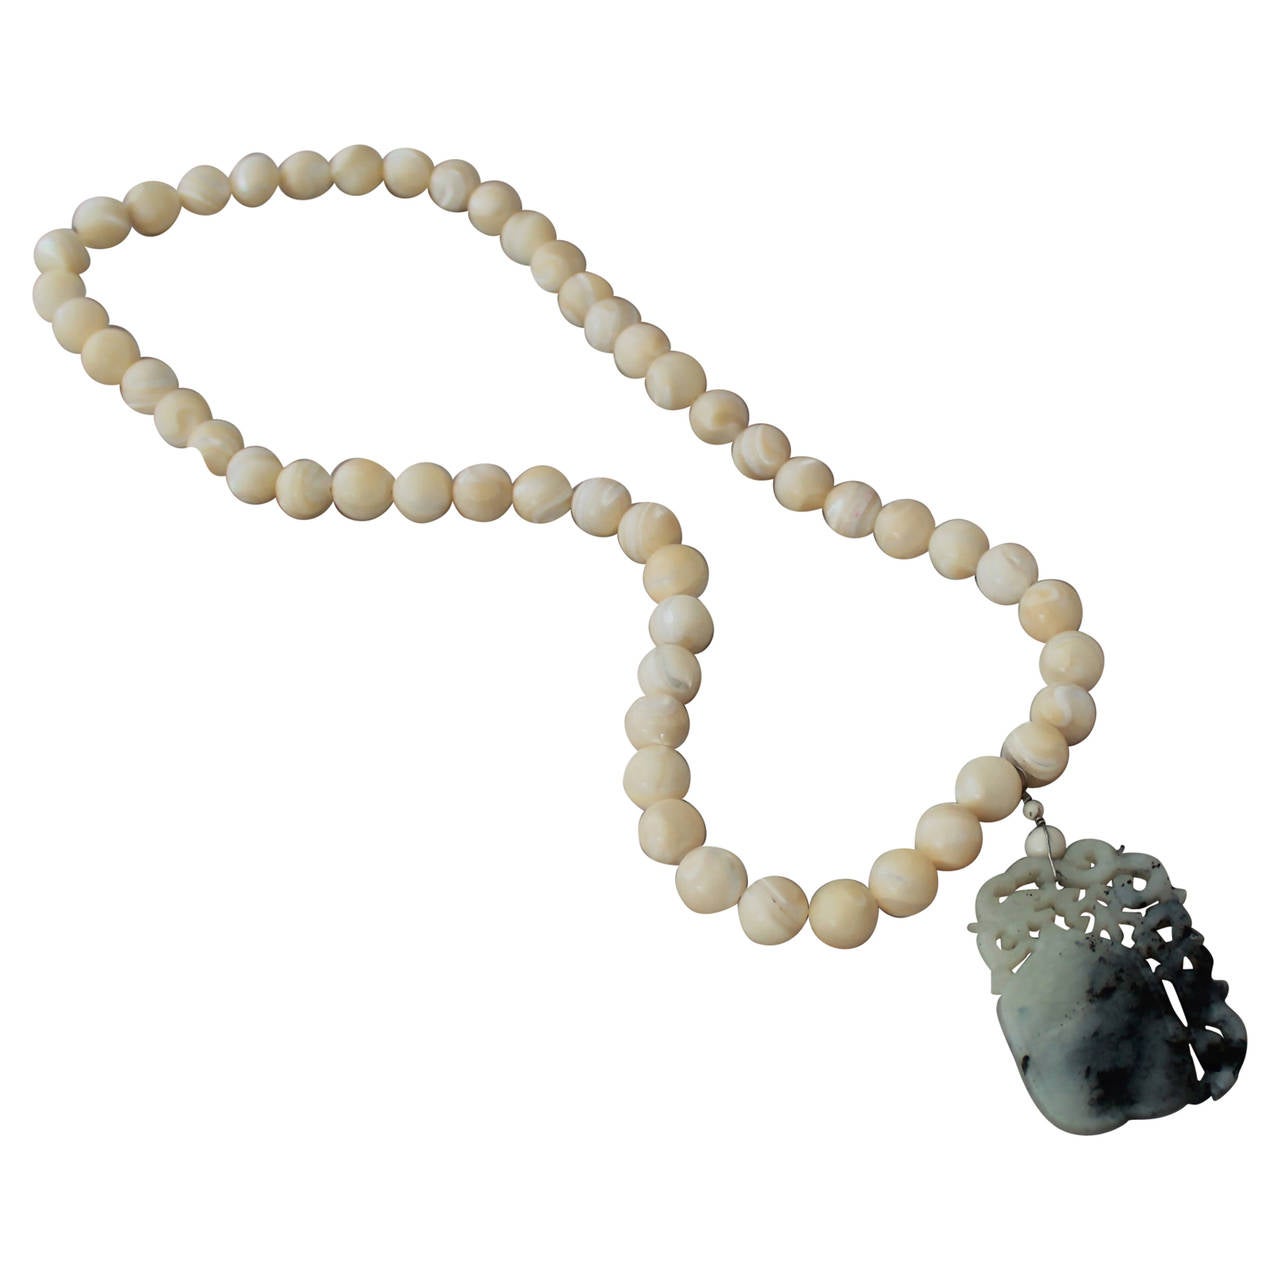 black onyx white jade mother of pearl White agate necklace ,black and white gemstone beaded necklace handmade white pendent